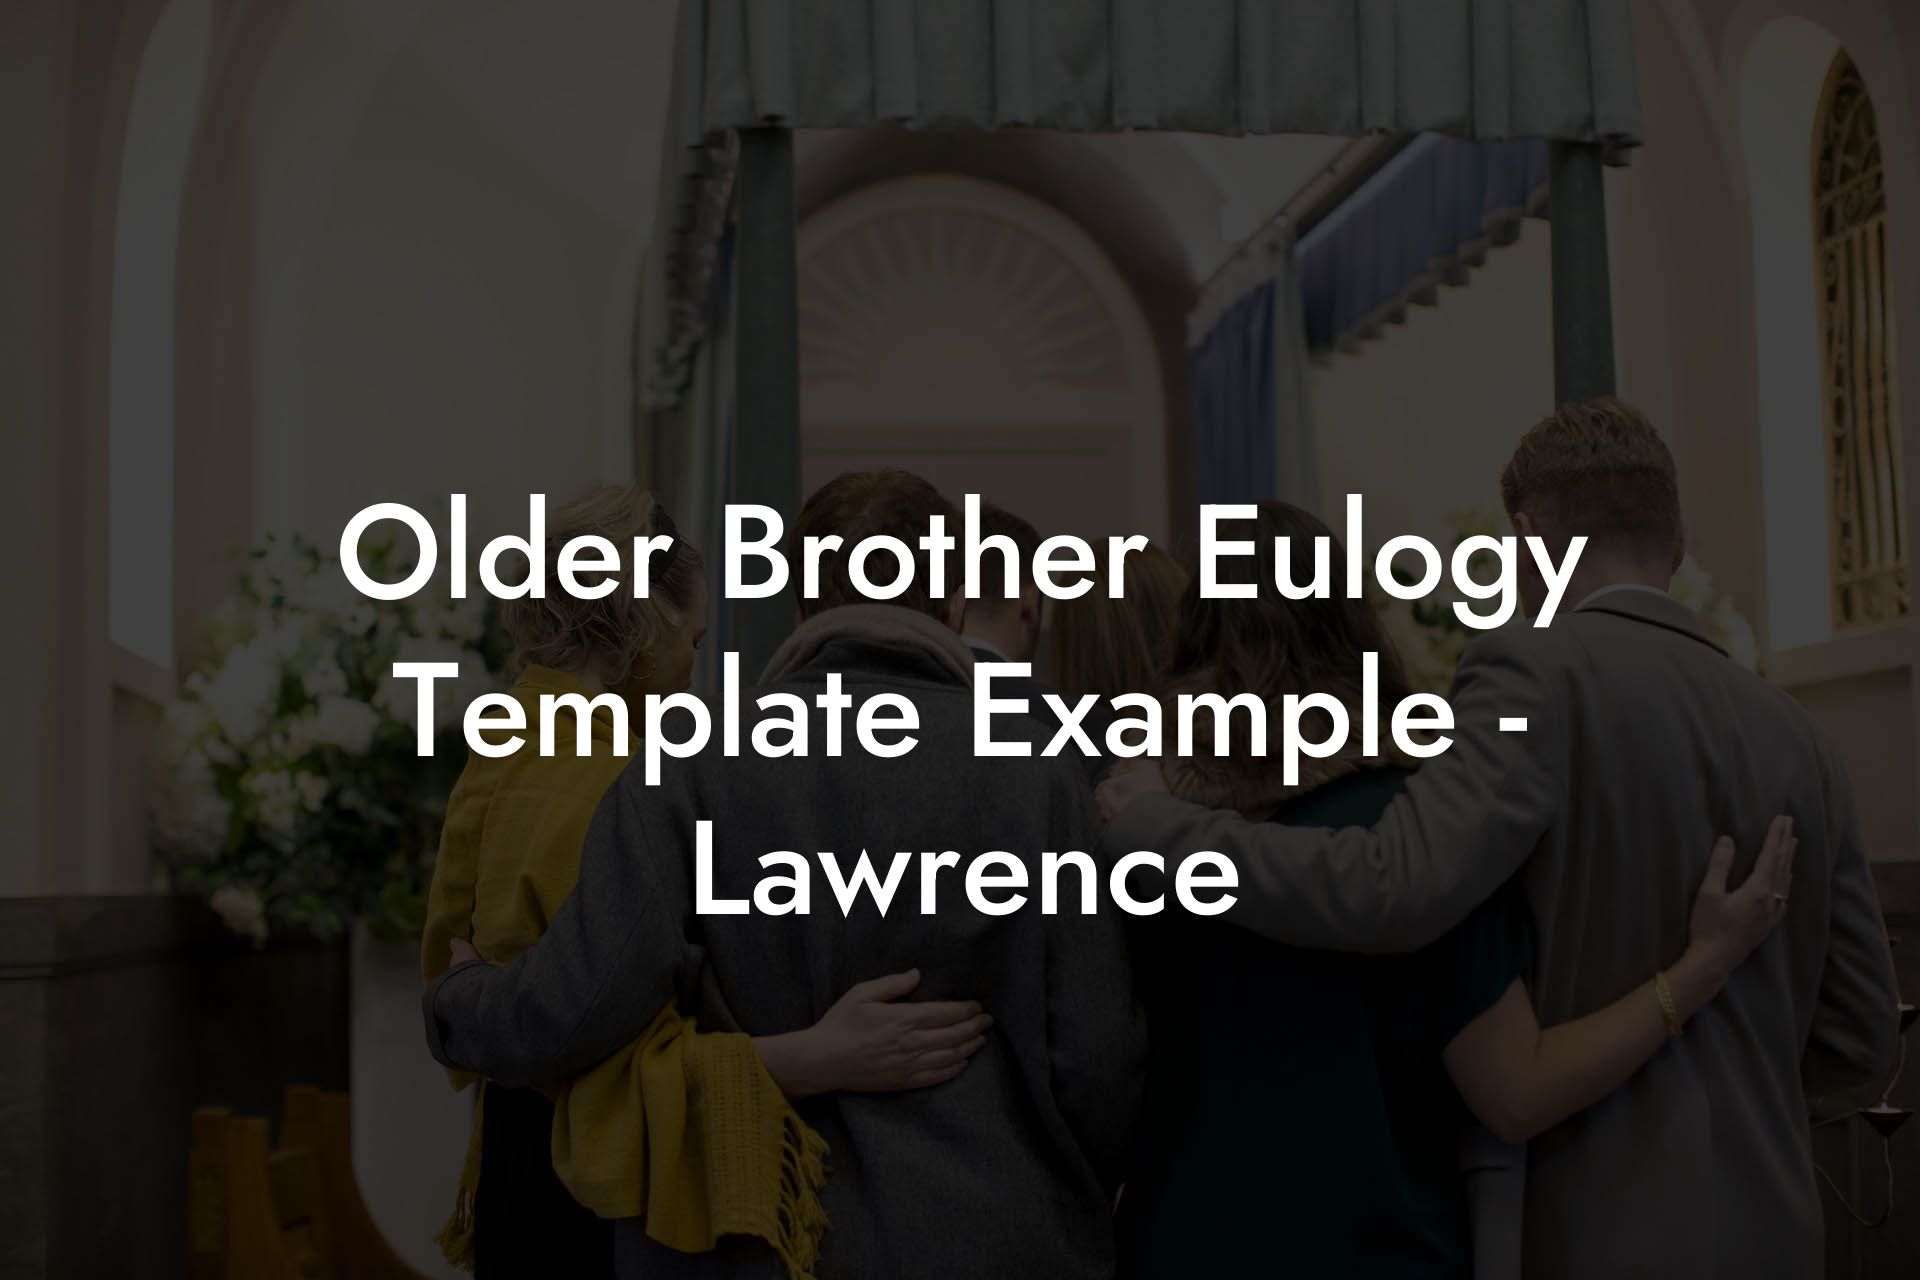 Older Brother Eulogy Template Example - Lawrence